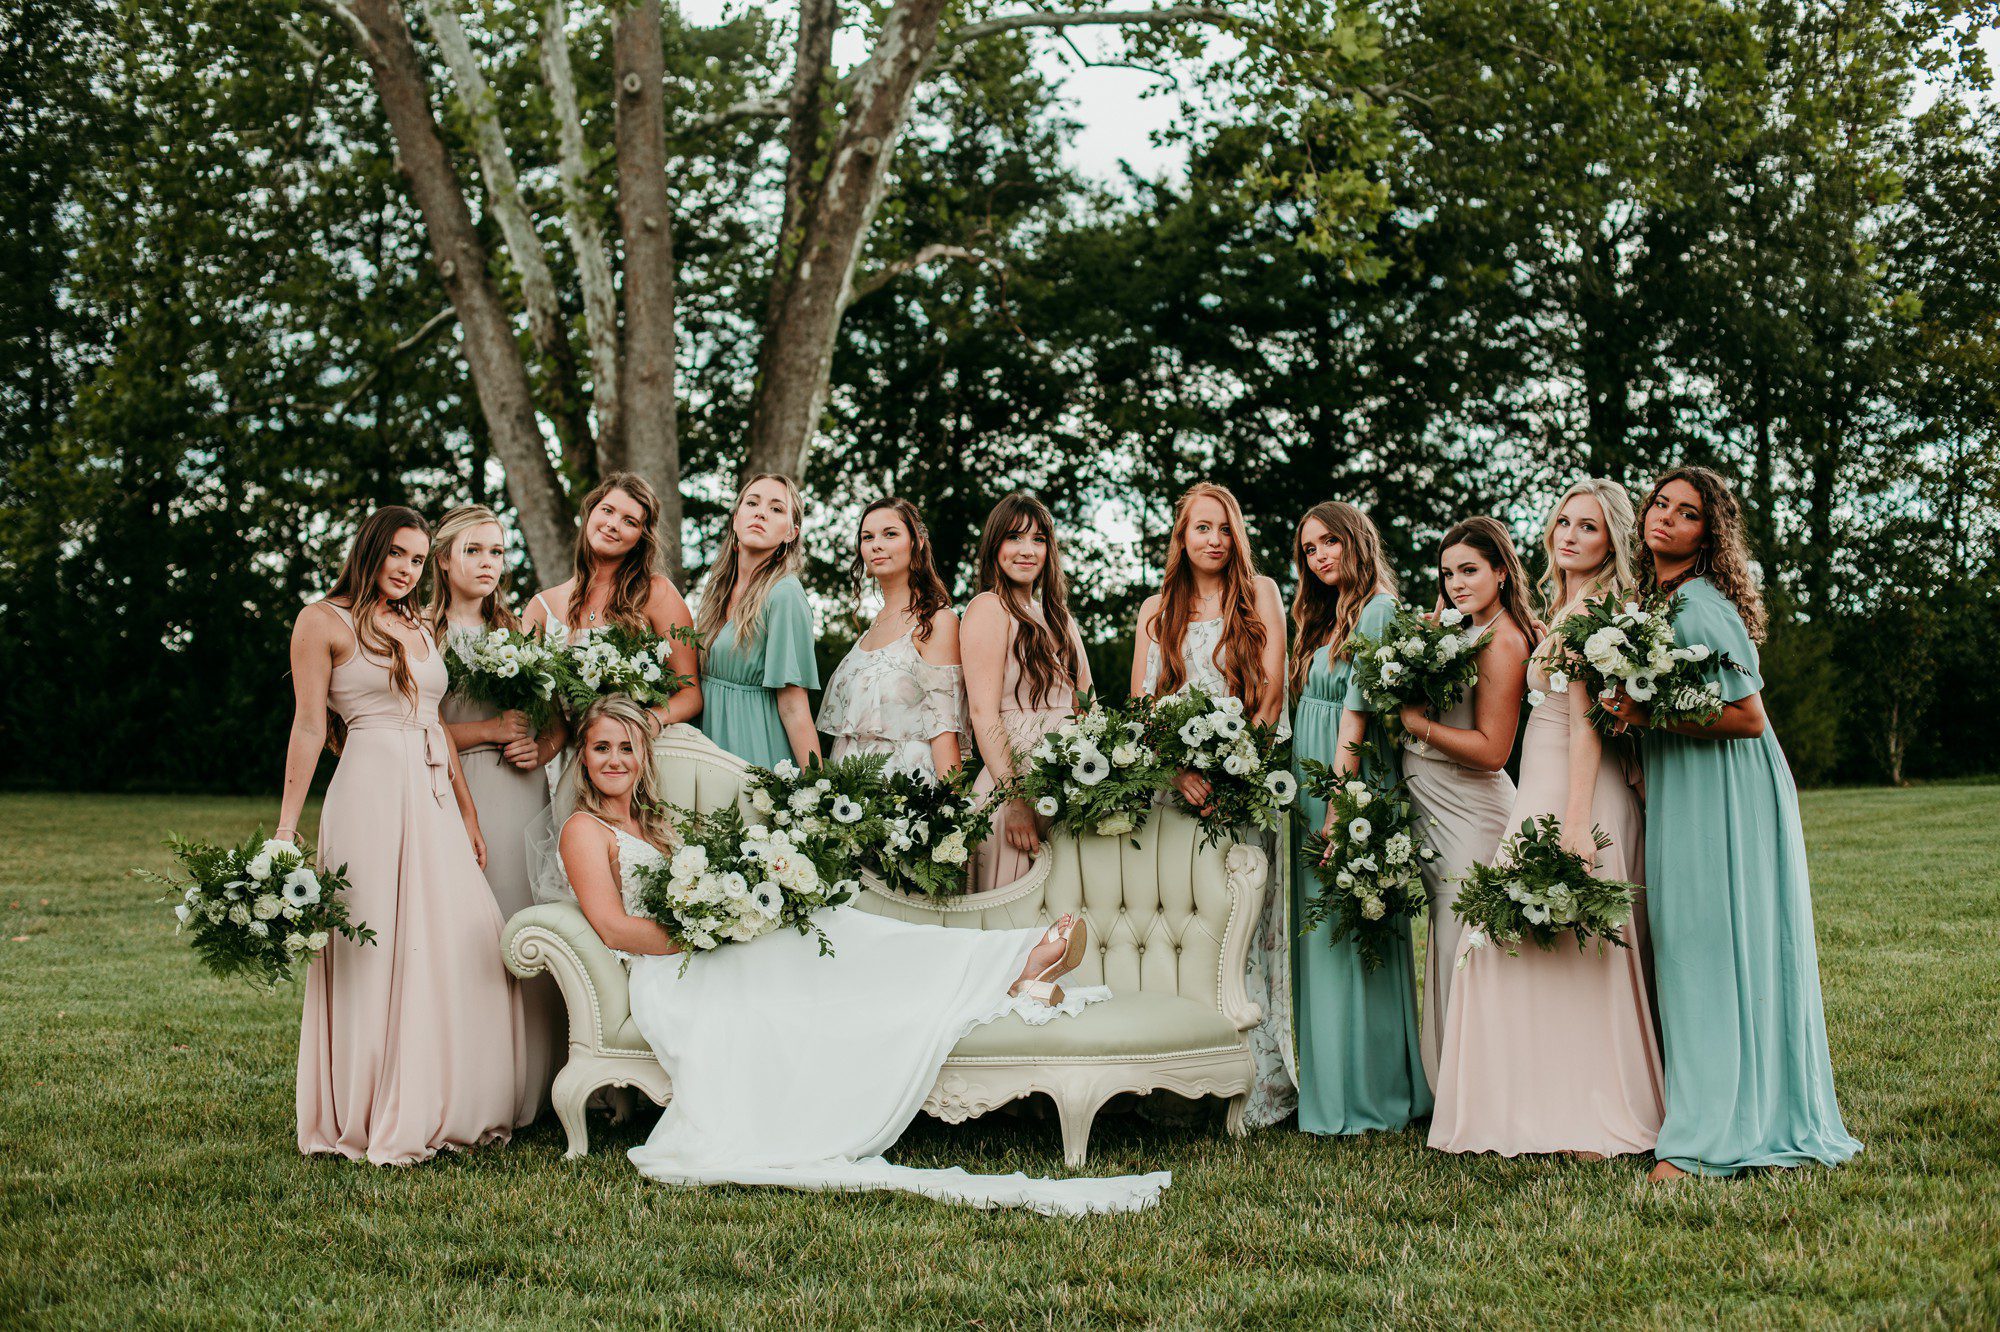 Mixed bridesmaid dresses with blush pink, aqua and floral prints and bride on sofa